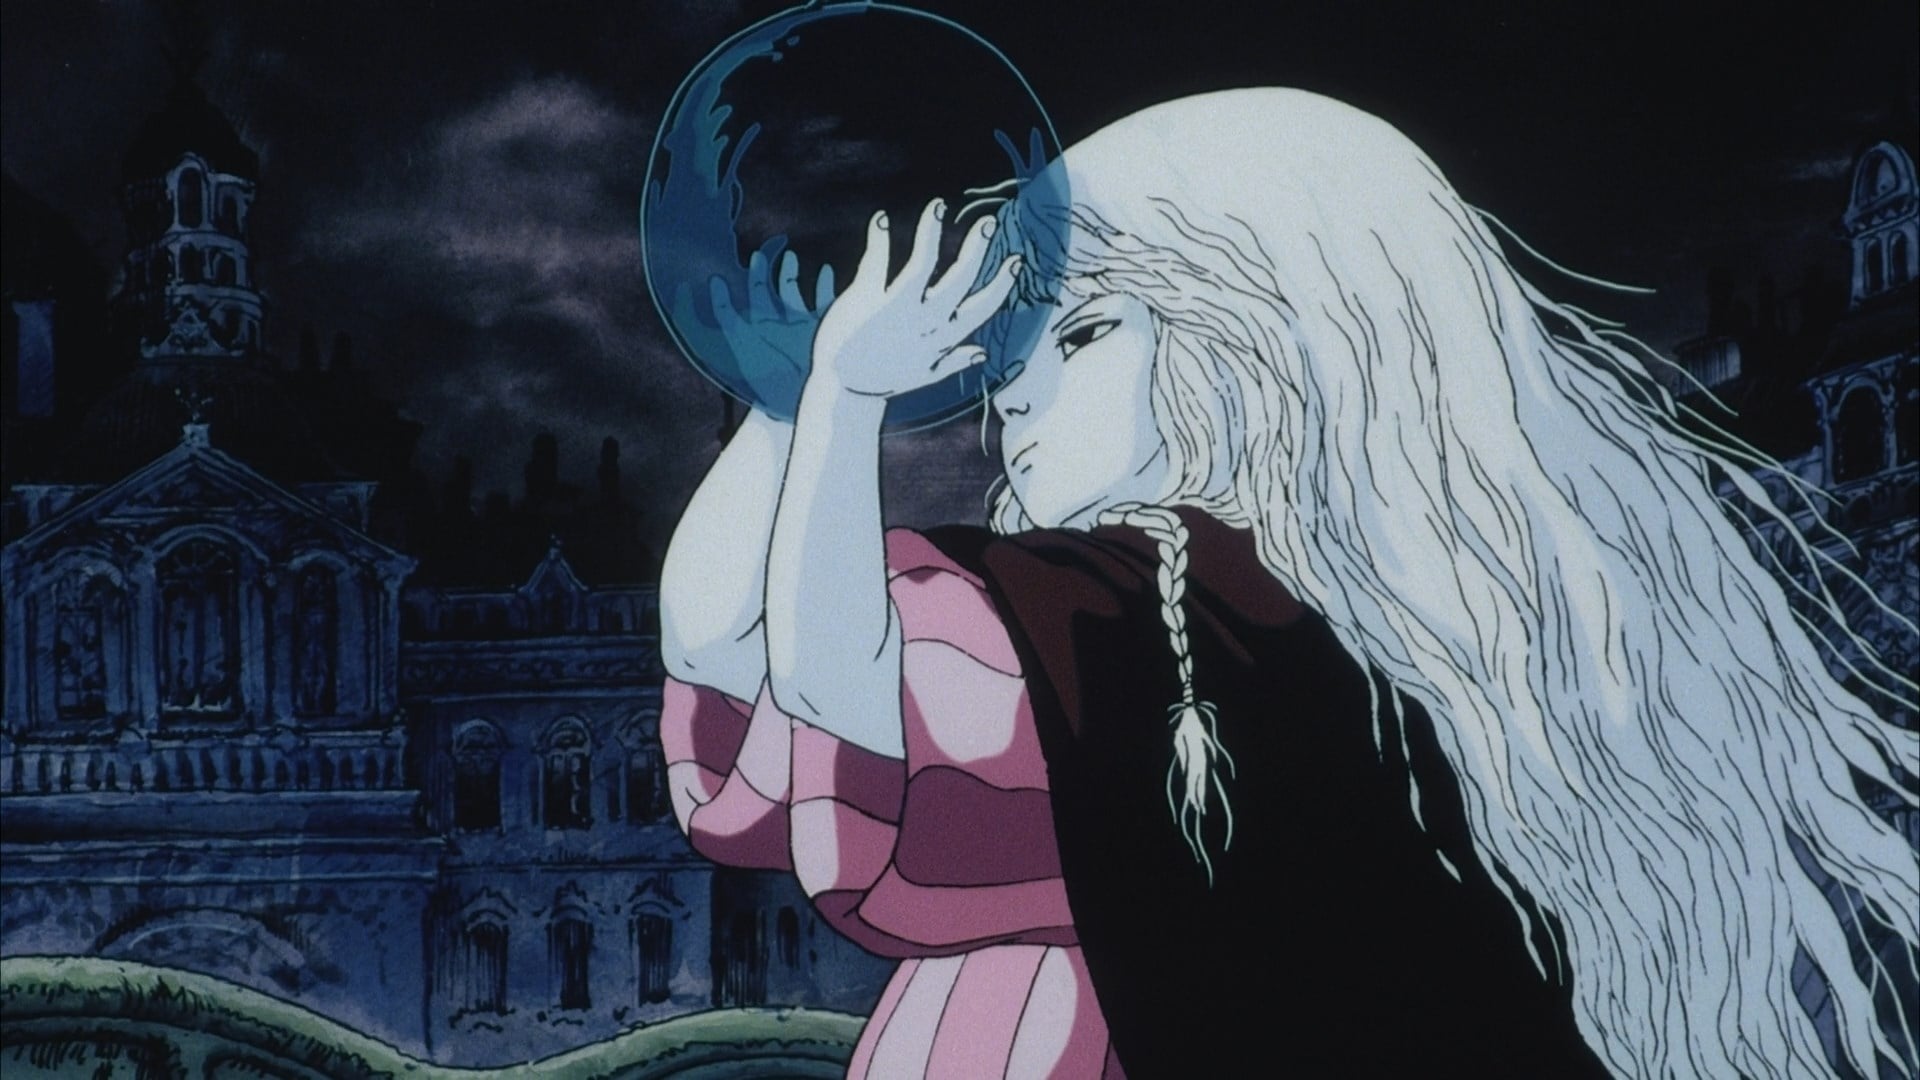 Three Anime Movies That Are as Beautiful as They Are Mindbending